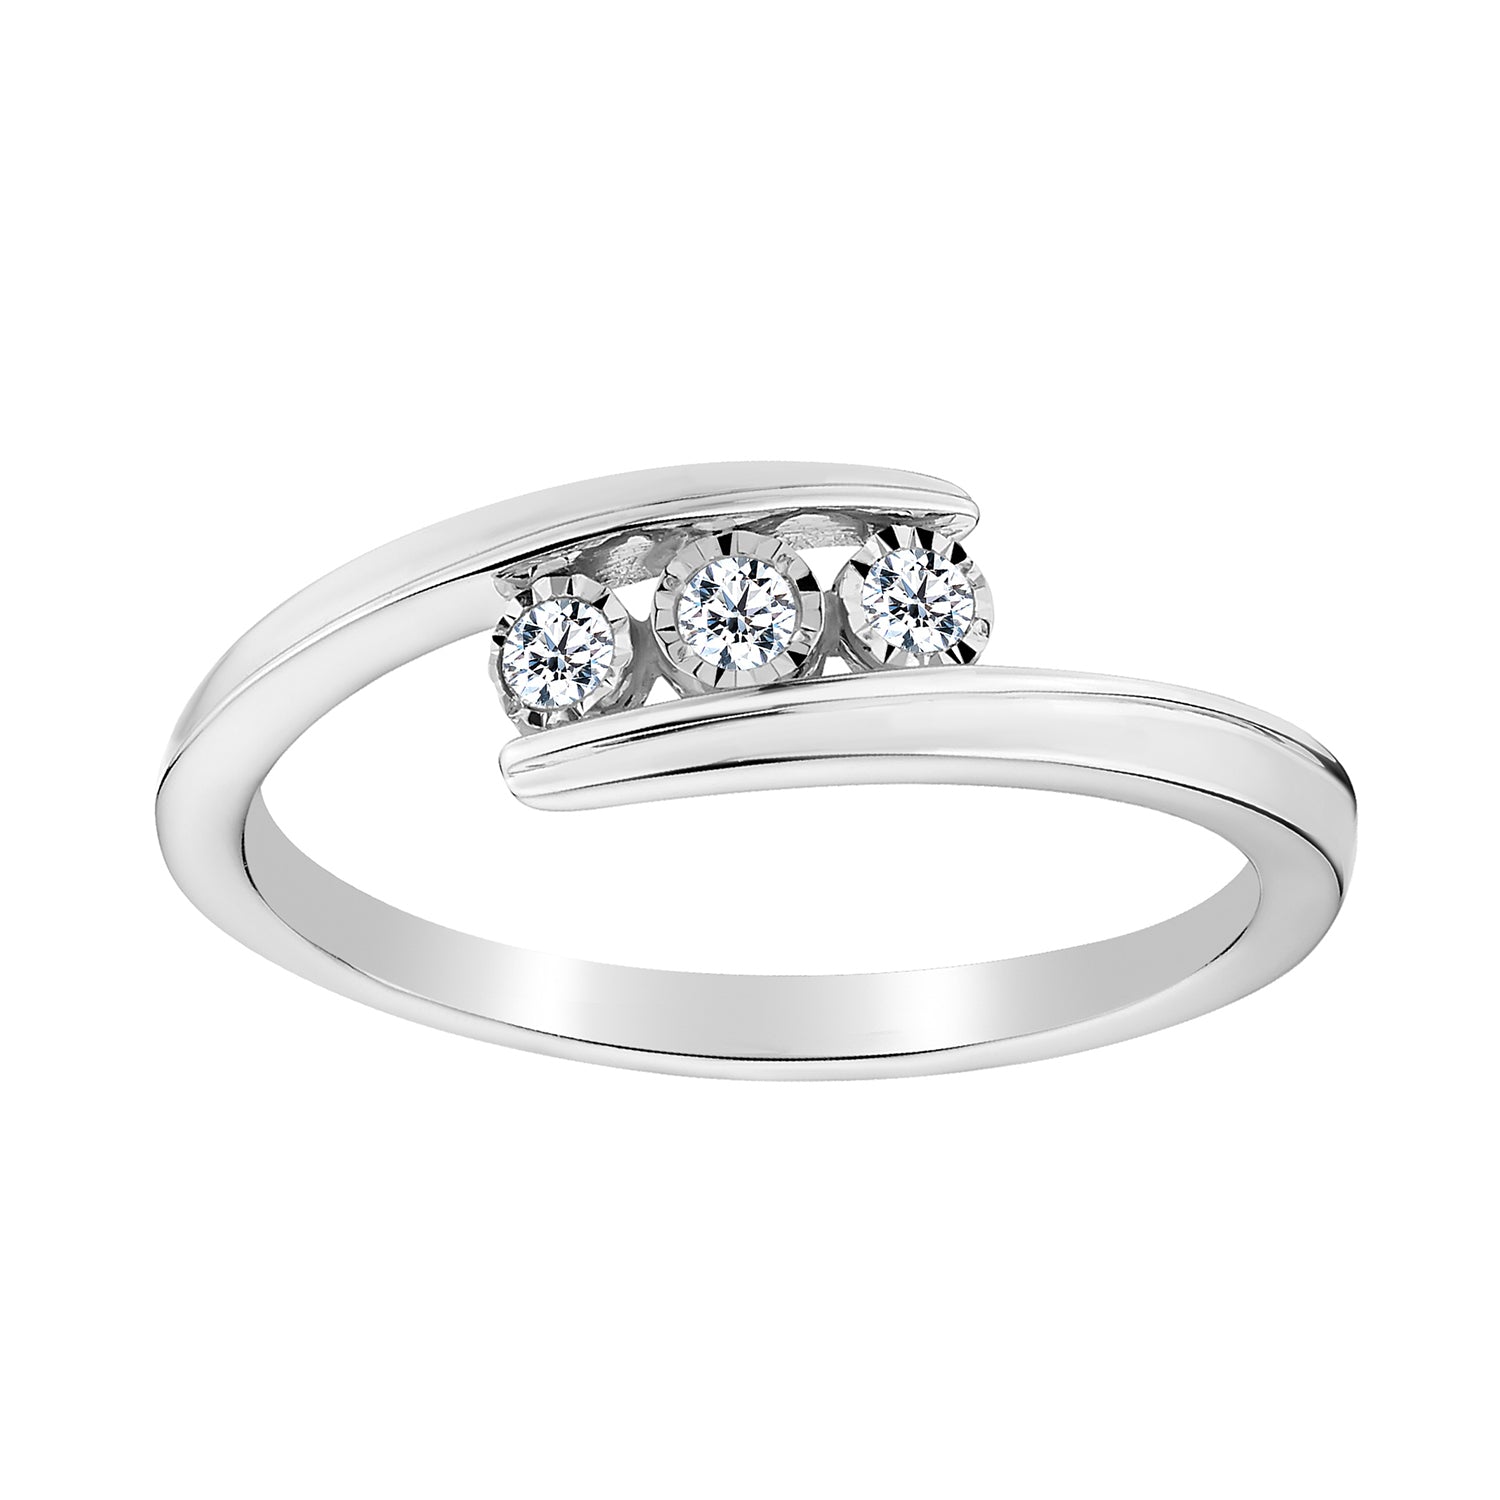 .10 CARAT DIAMOND  "PAST, PRESENT, FUTURE" RING, 10kt WHITE GOLD......................NOW - Griffin Jewellery Designs